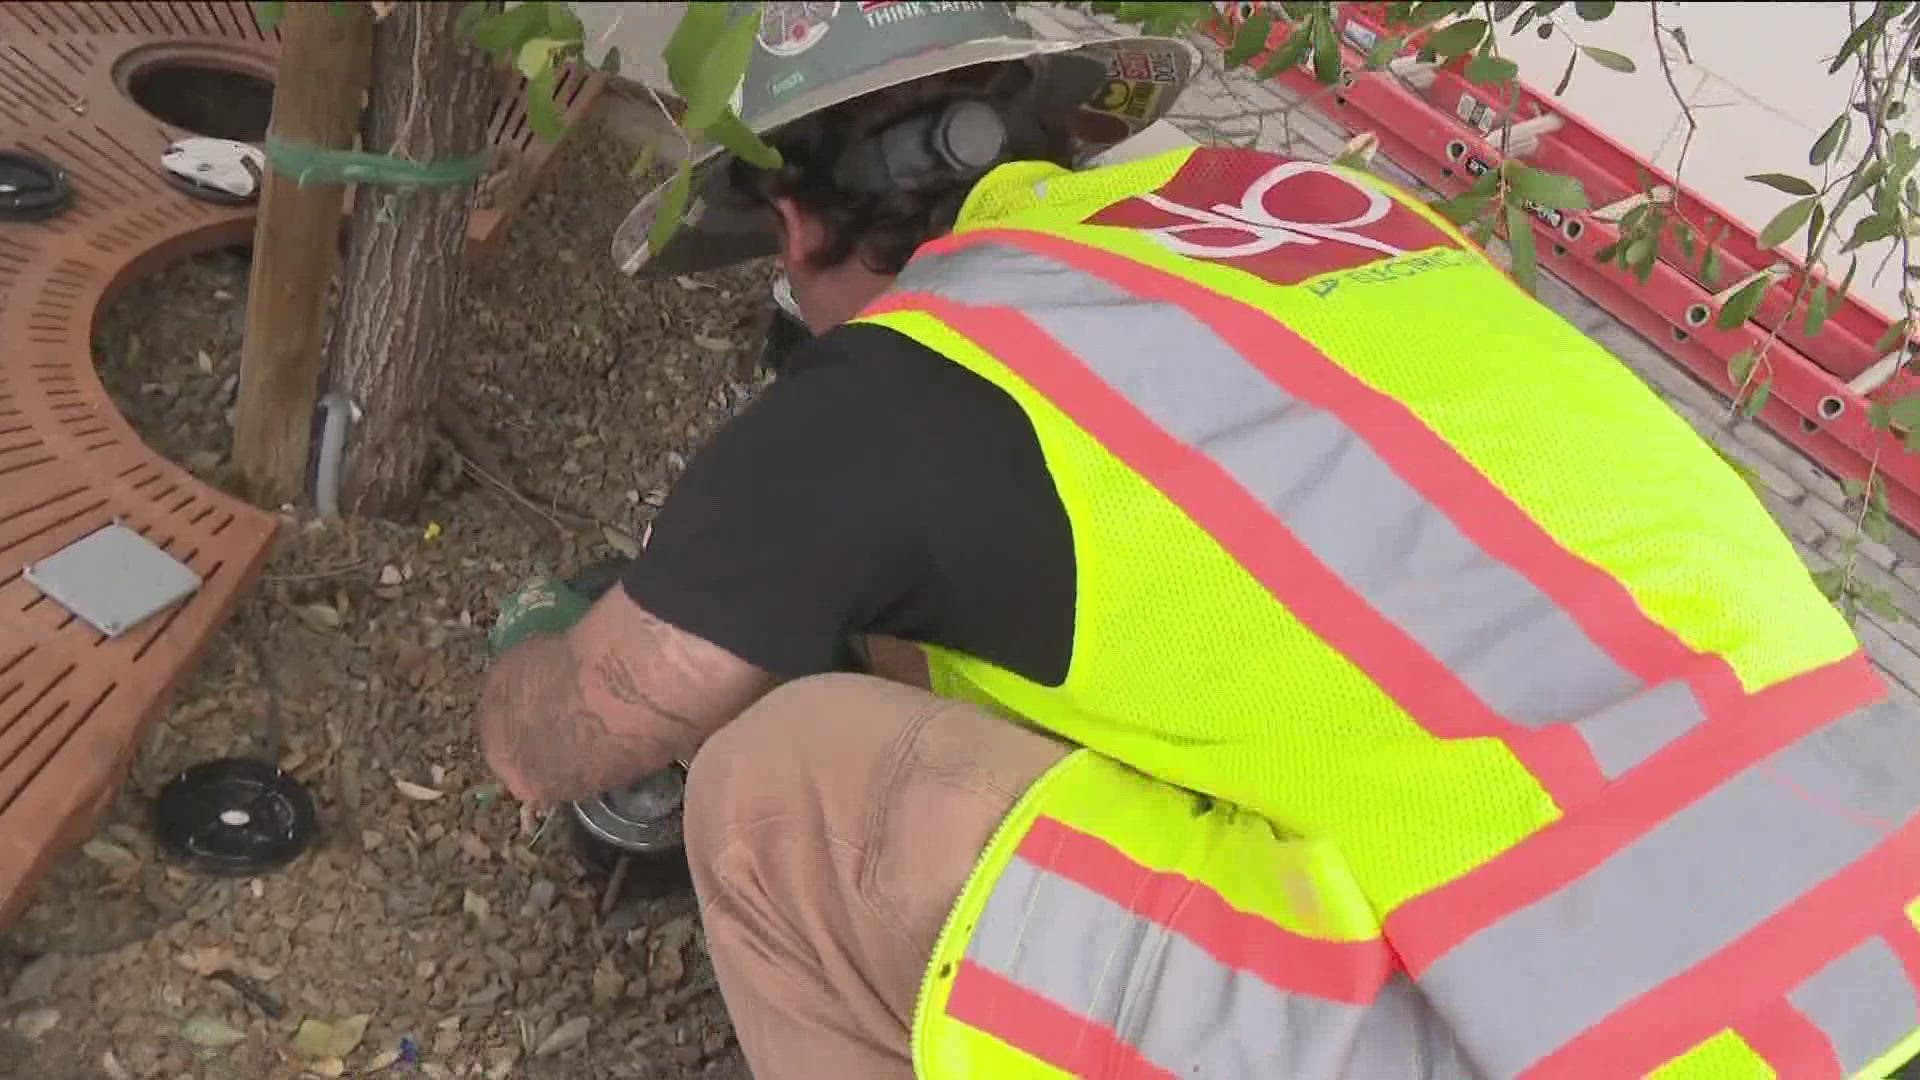 During the sweltering Arizona summers, construction workers deal with a number of different weather issues. Jen Wahl has more on this story.